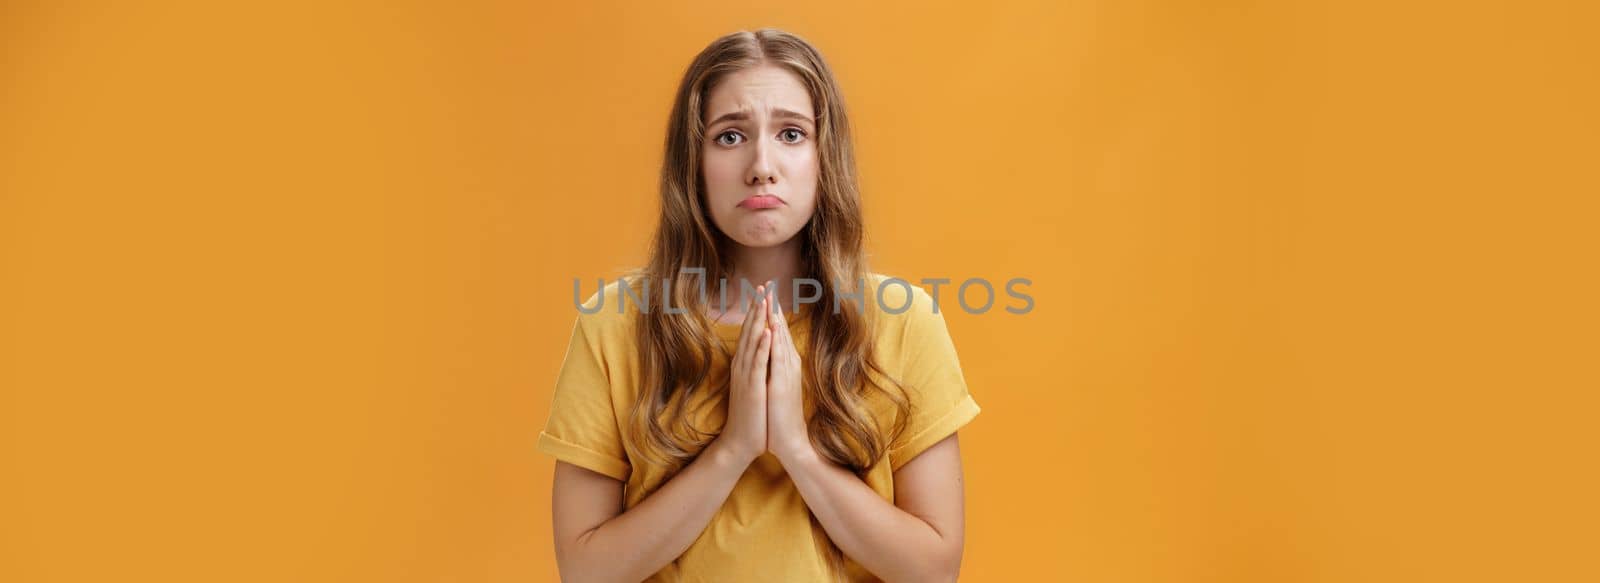 Silly girl needs help begging with hopeful puppy eyes holding hands in pray pouting and frowning feeling miserable stuck in bad situation standing upset over orange background, borrowing money.